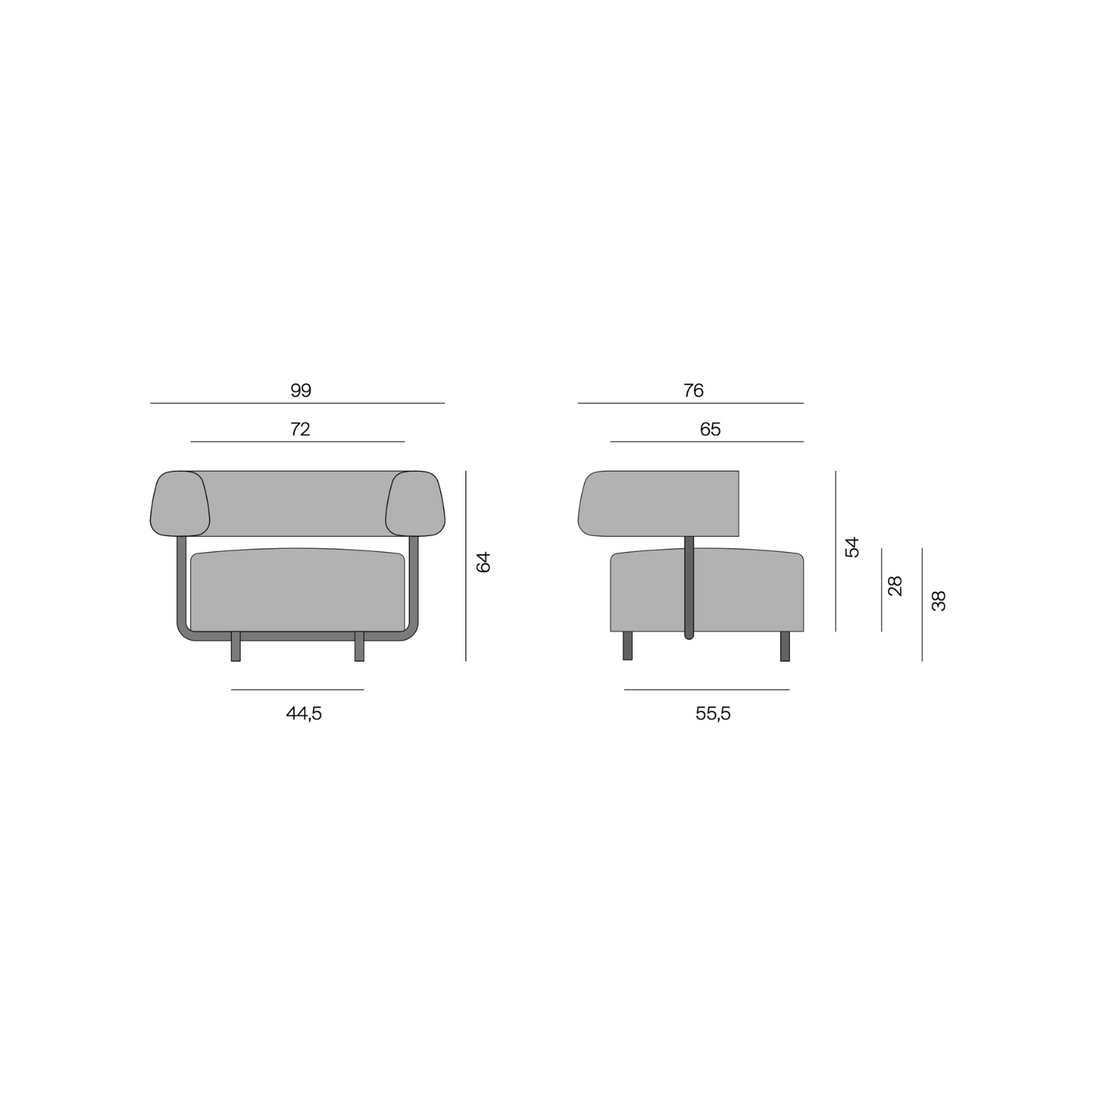 More Moebel Oso Easy Chair Dimensions